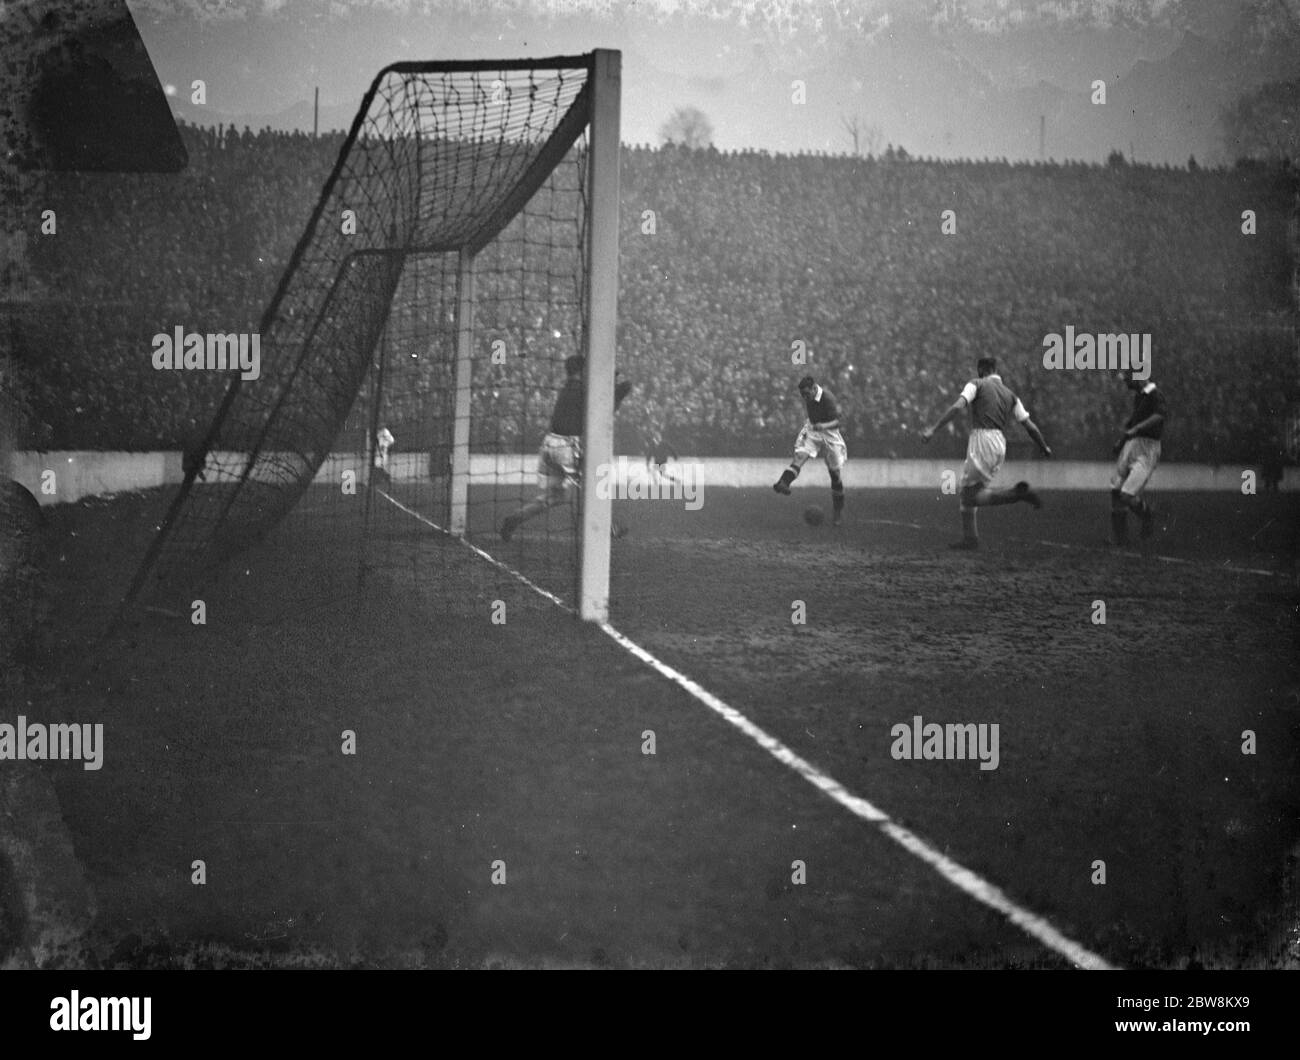 Charlton Athletic football club versus Cardiff City football club . The goalkeeper watches as an attacker shoots the ball at the goal . 1938 Stock Photo